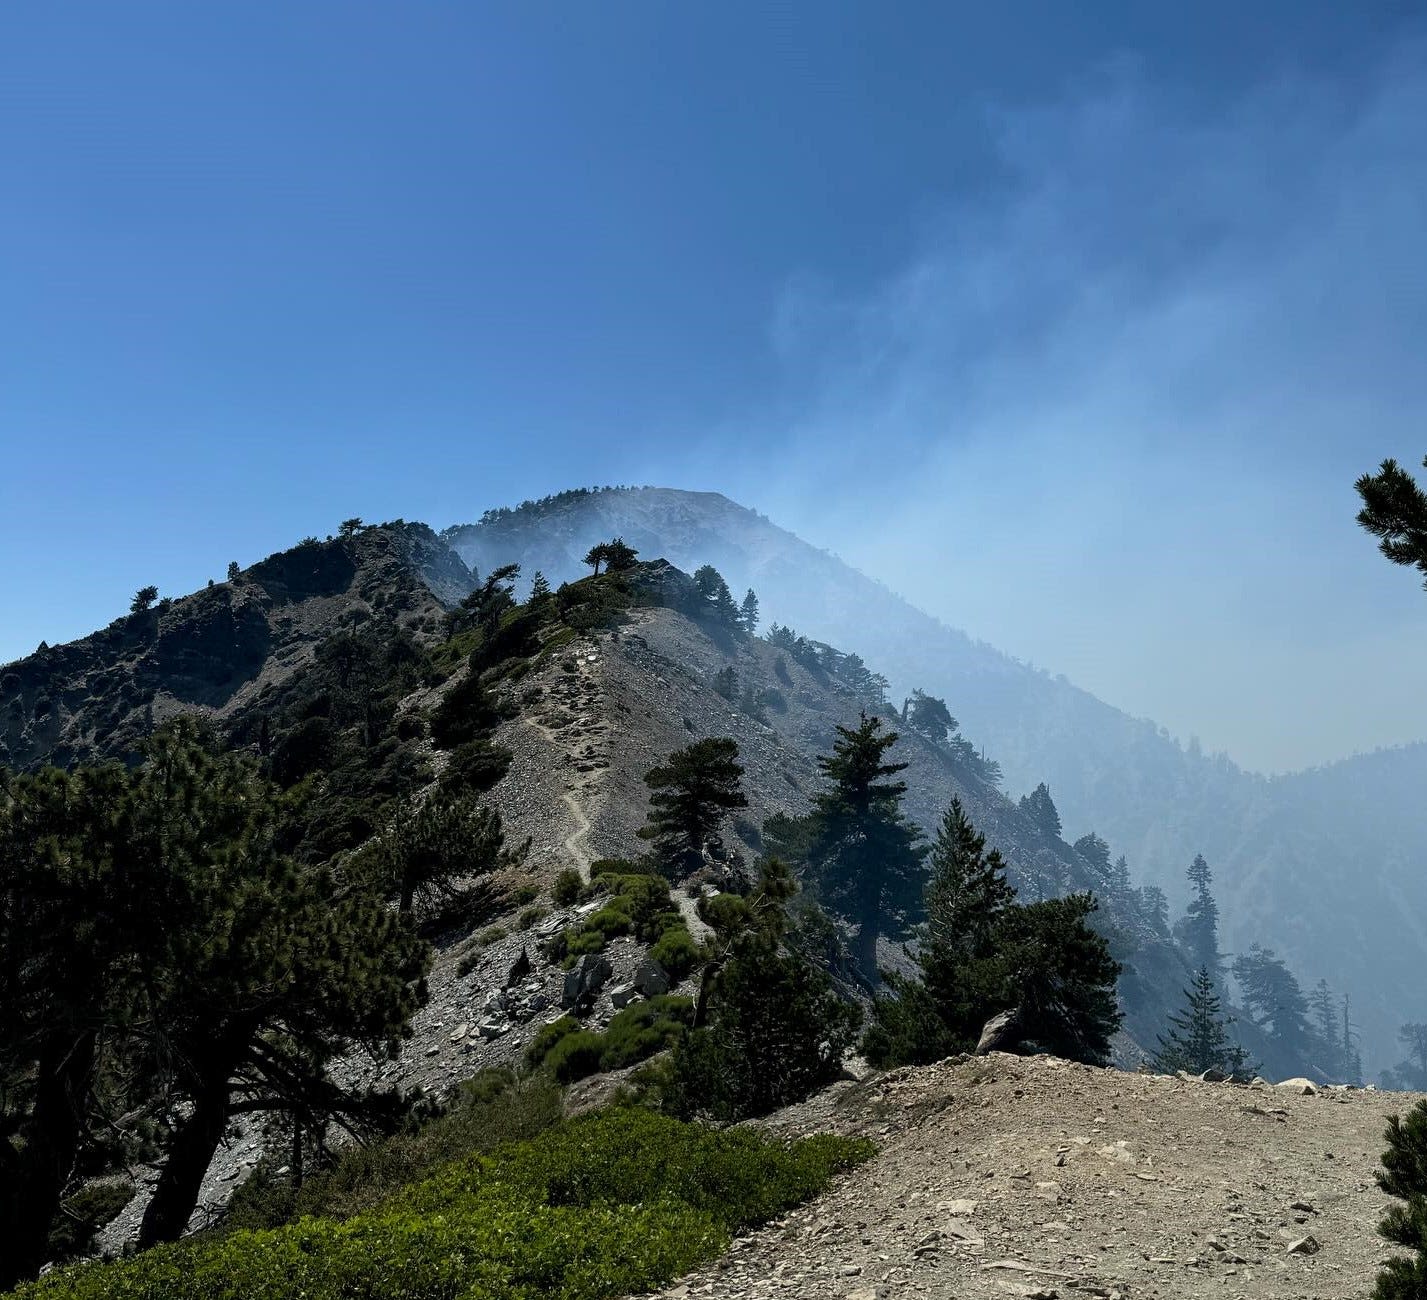 Vista Fire containment increased to 31%